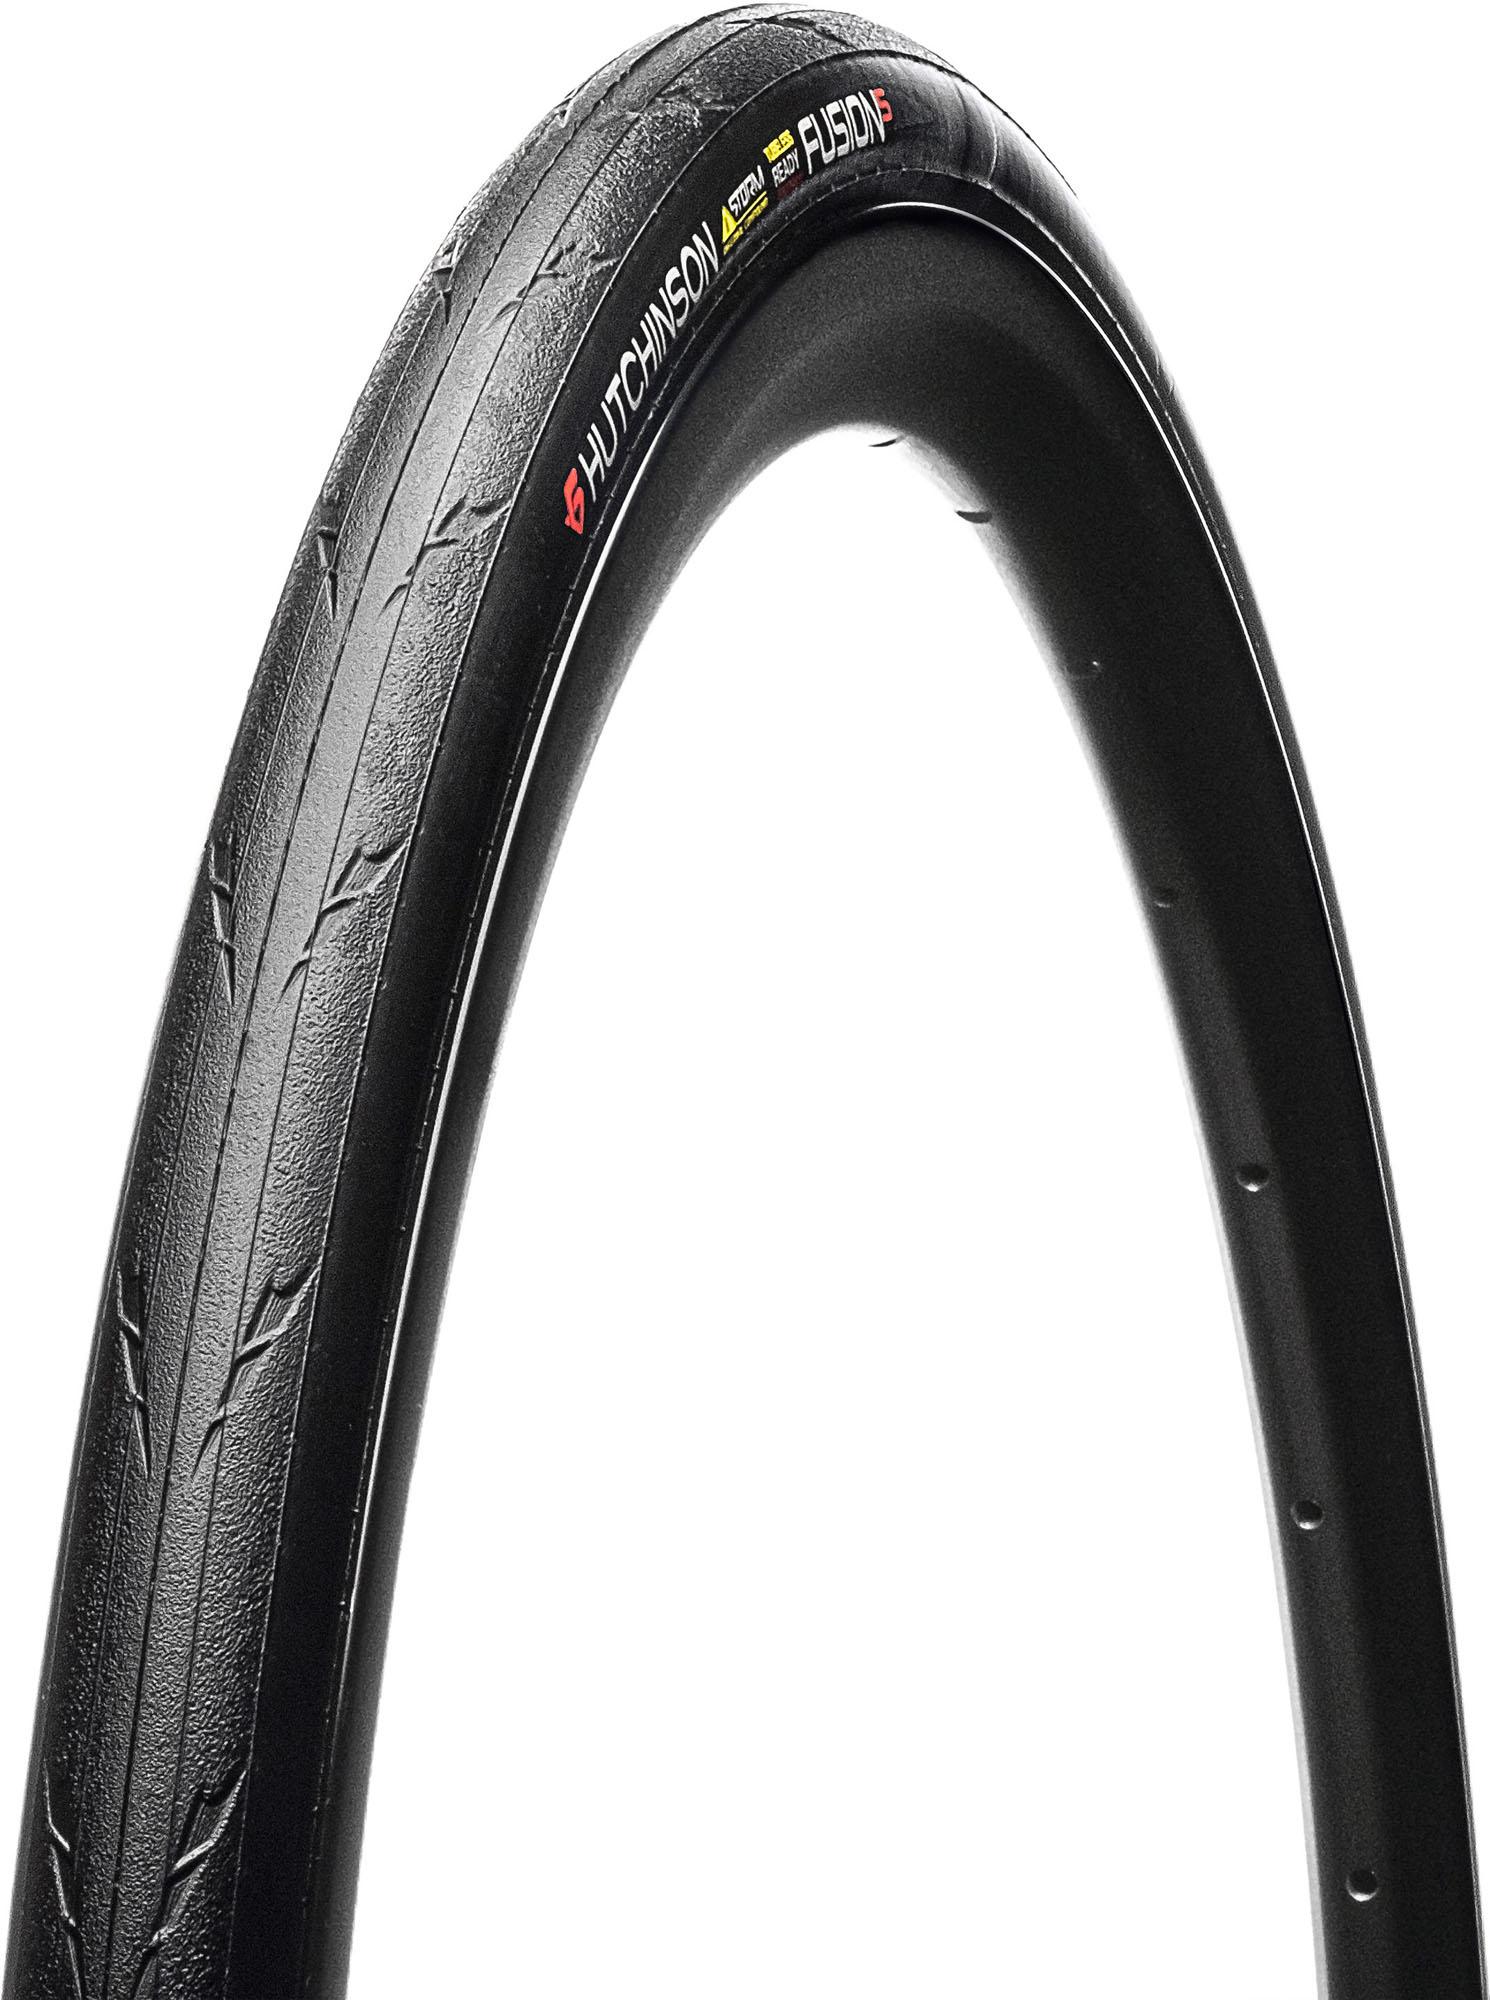 Hutchinson Fusion 5 Tlr Performance 11storm Road Tyre - Black